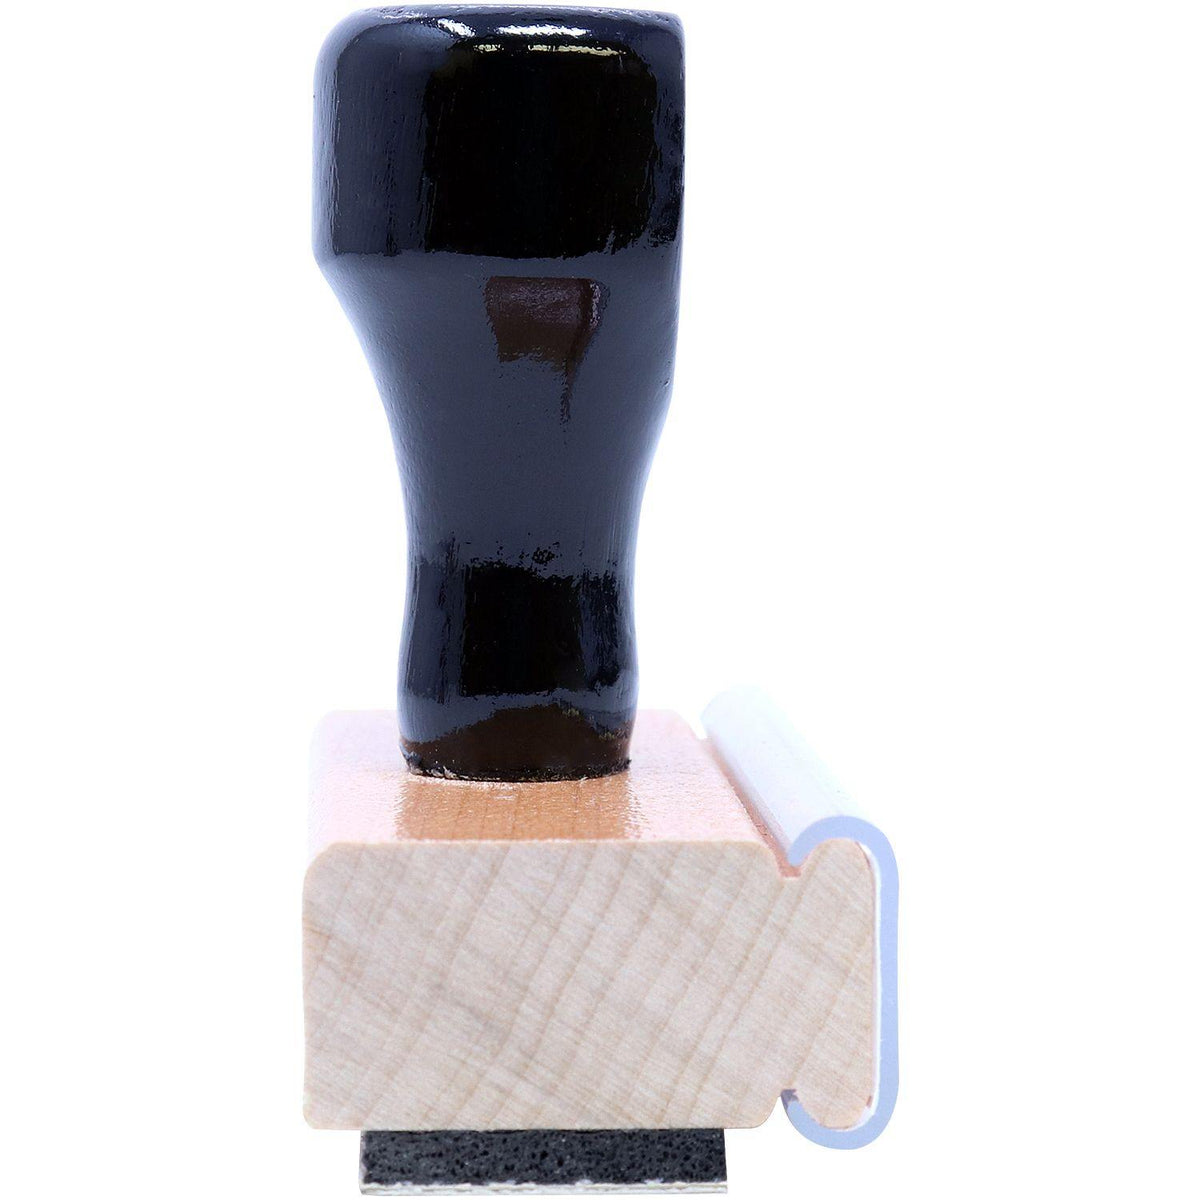 Petition Rubber Stamp - Engineer Seal Stamps - Brand_Acorn, Impression Size_Small, Stamp Type_Regular Stamp, Type of Use_Office, Type of Use_Professional